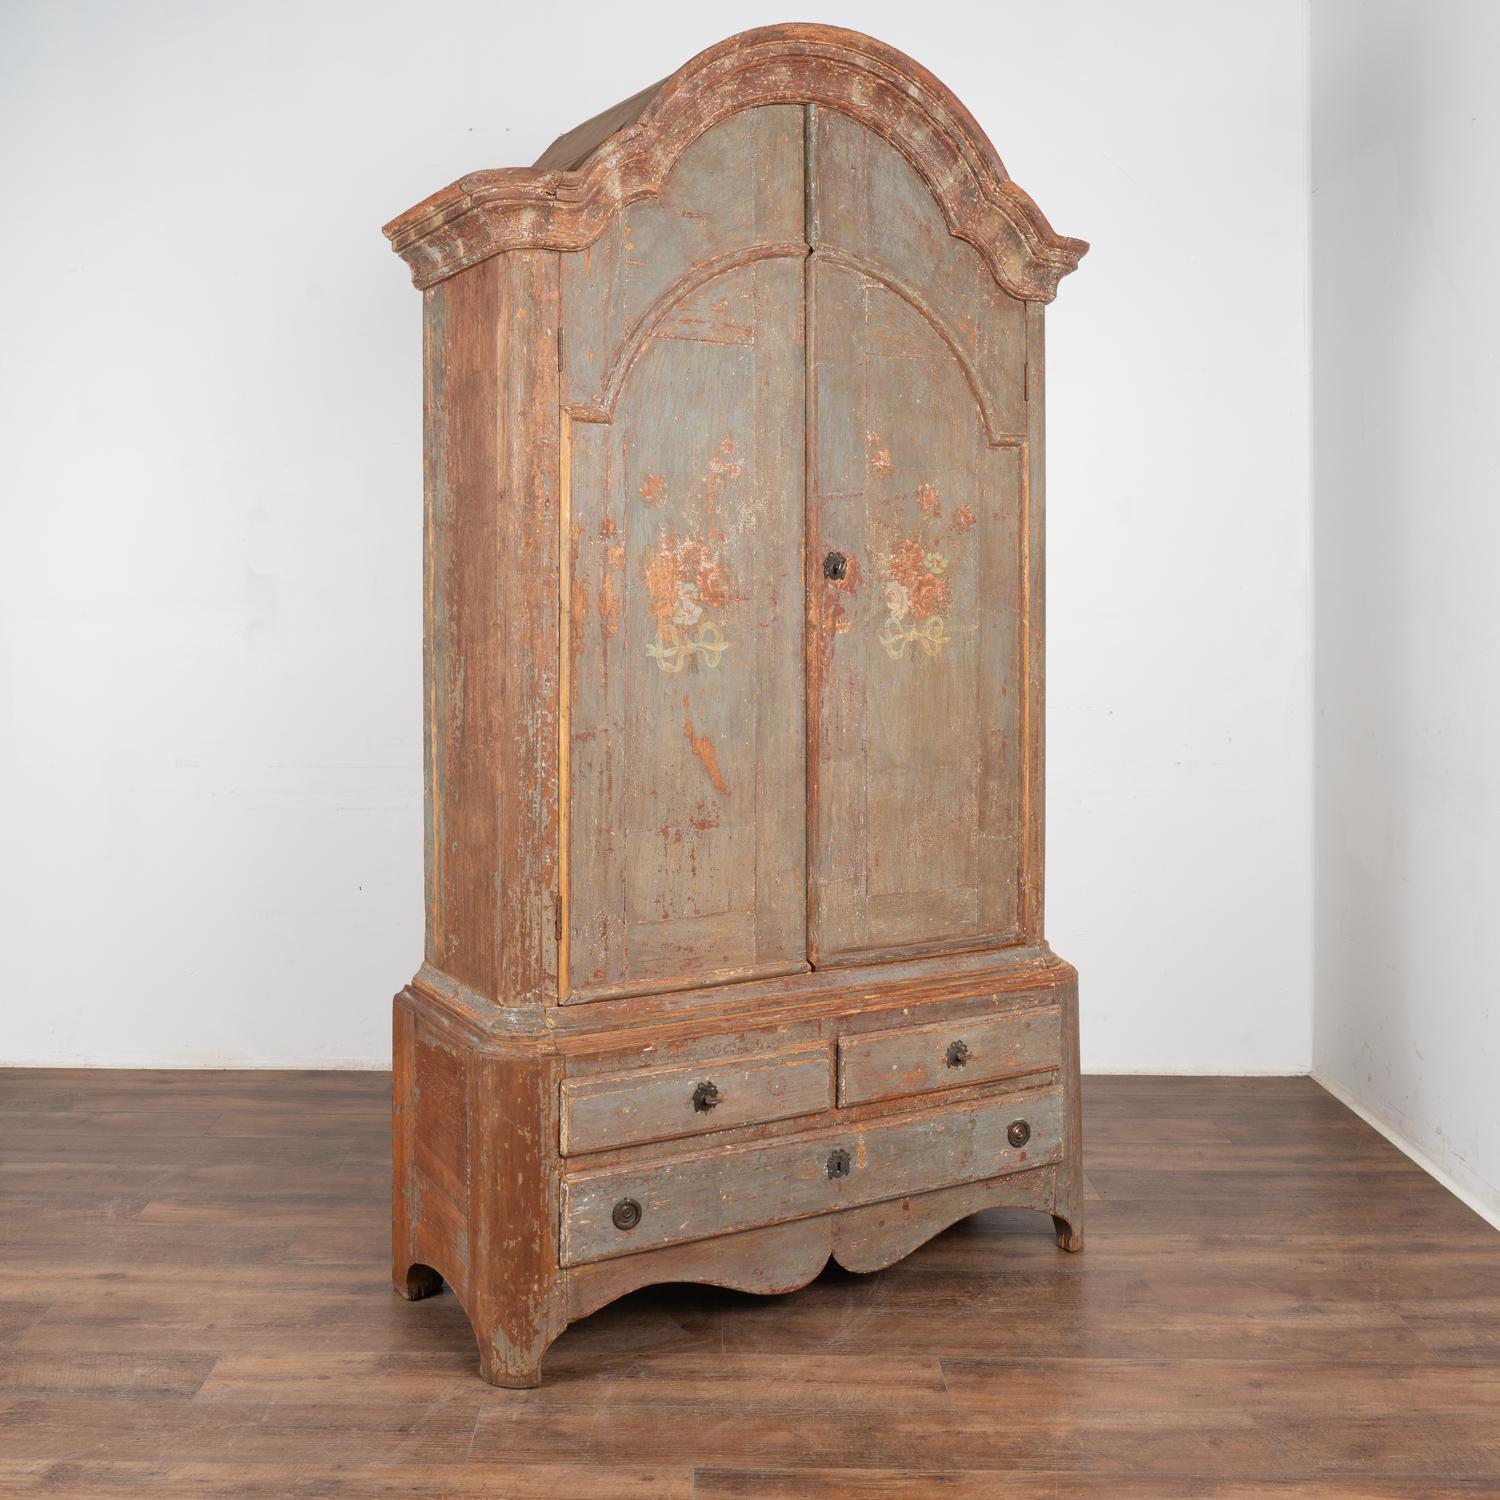 Original painted Swedish wedding cabinet from the early 1800's with floral bouquet on each door.
Note the traditional curved and carved upper bonnet, two cabinet doors over three lower drawers, four interior shelves and upper spoon rack.
Layers of